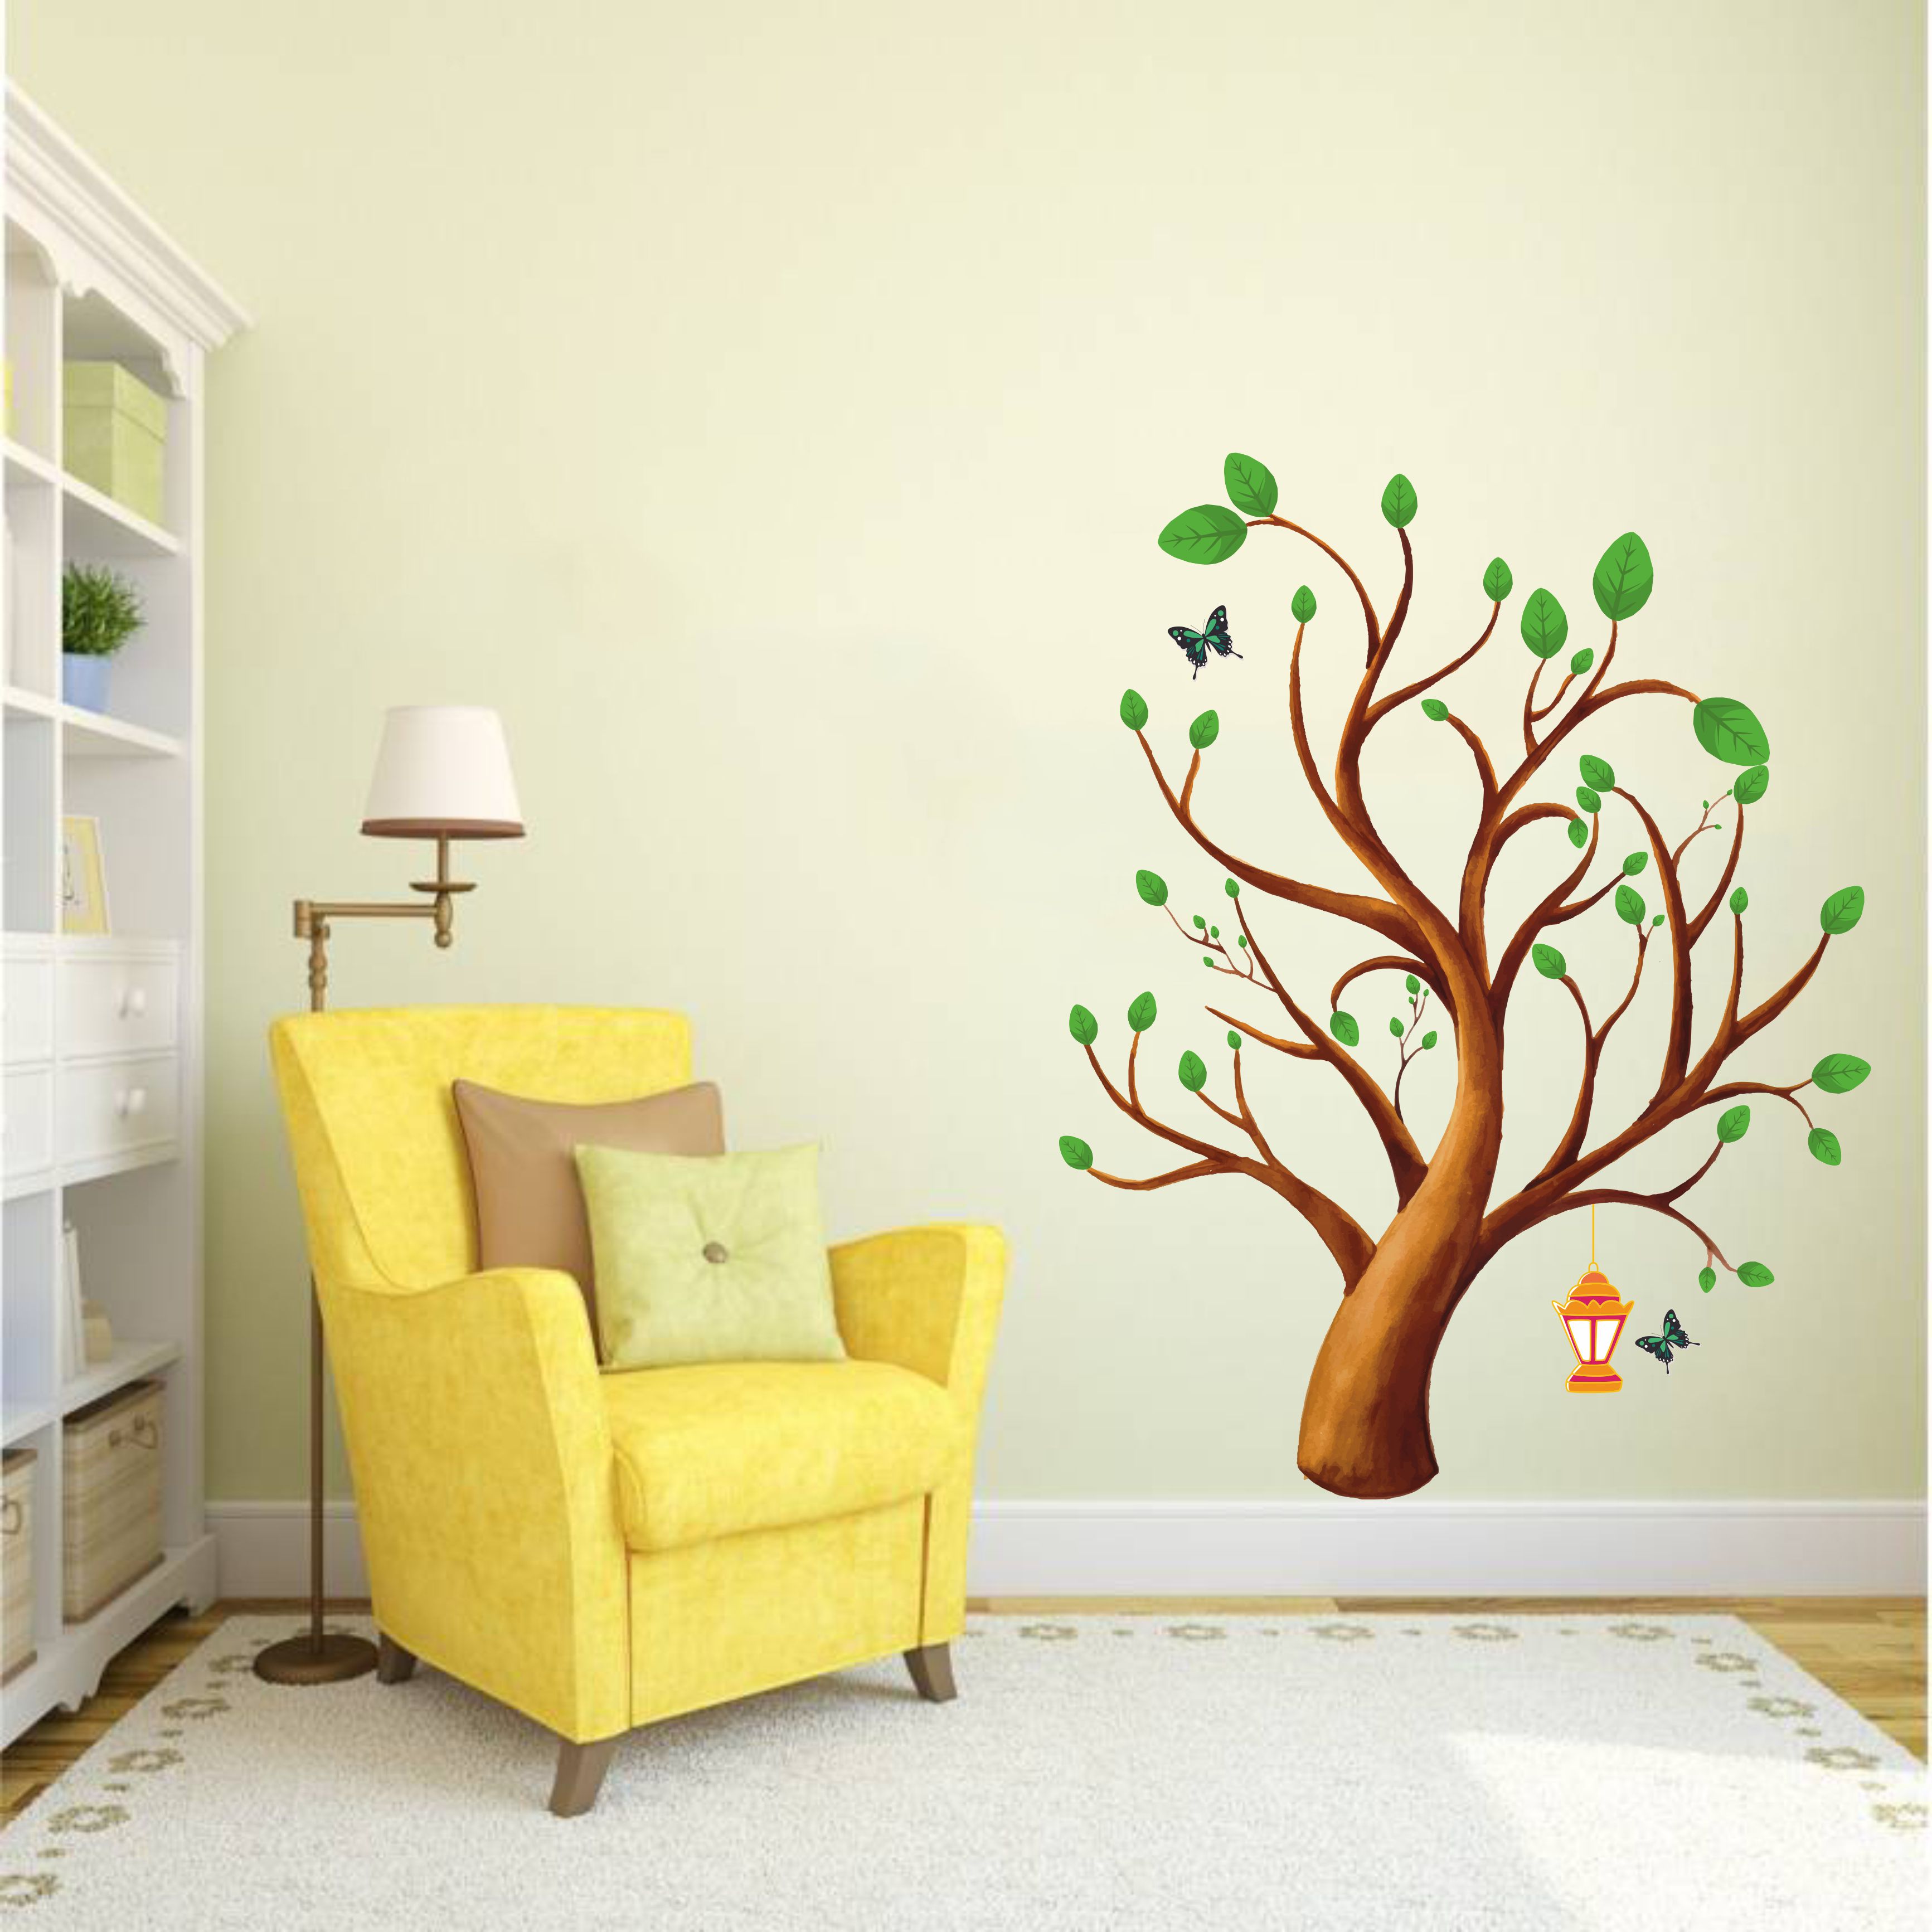 ORKA Nature Wall Decal Sticker 62  